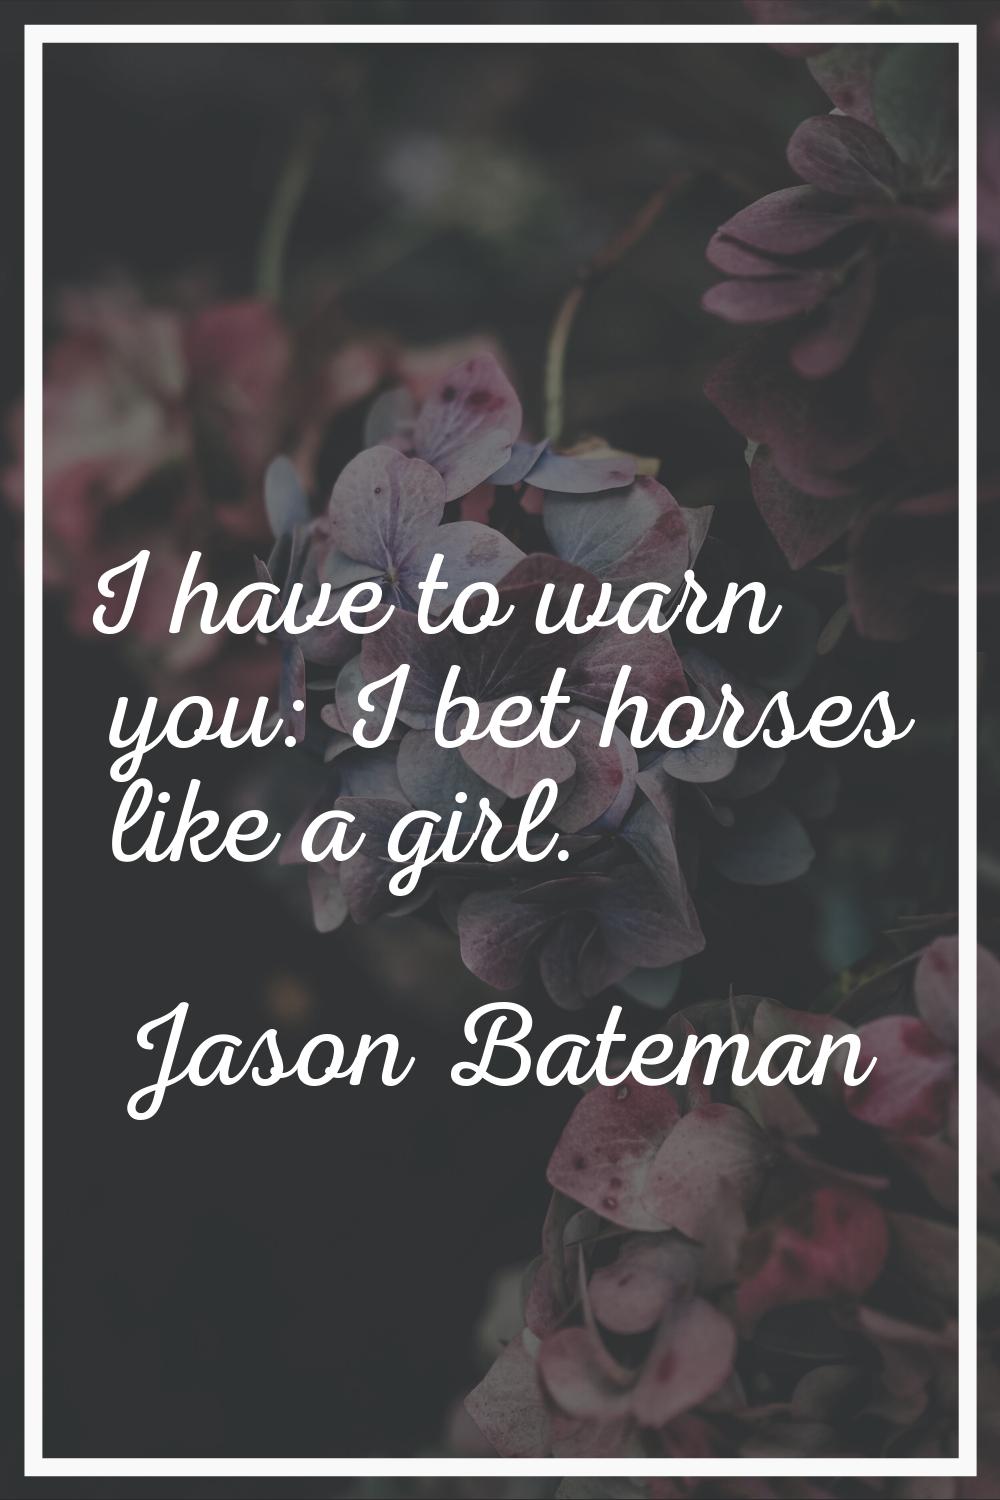 I have to warn you: I bet horses like a girl.